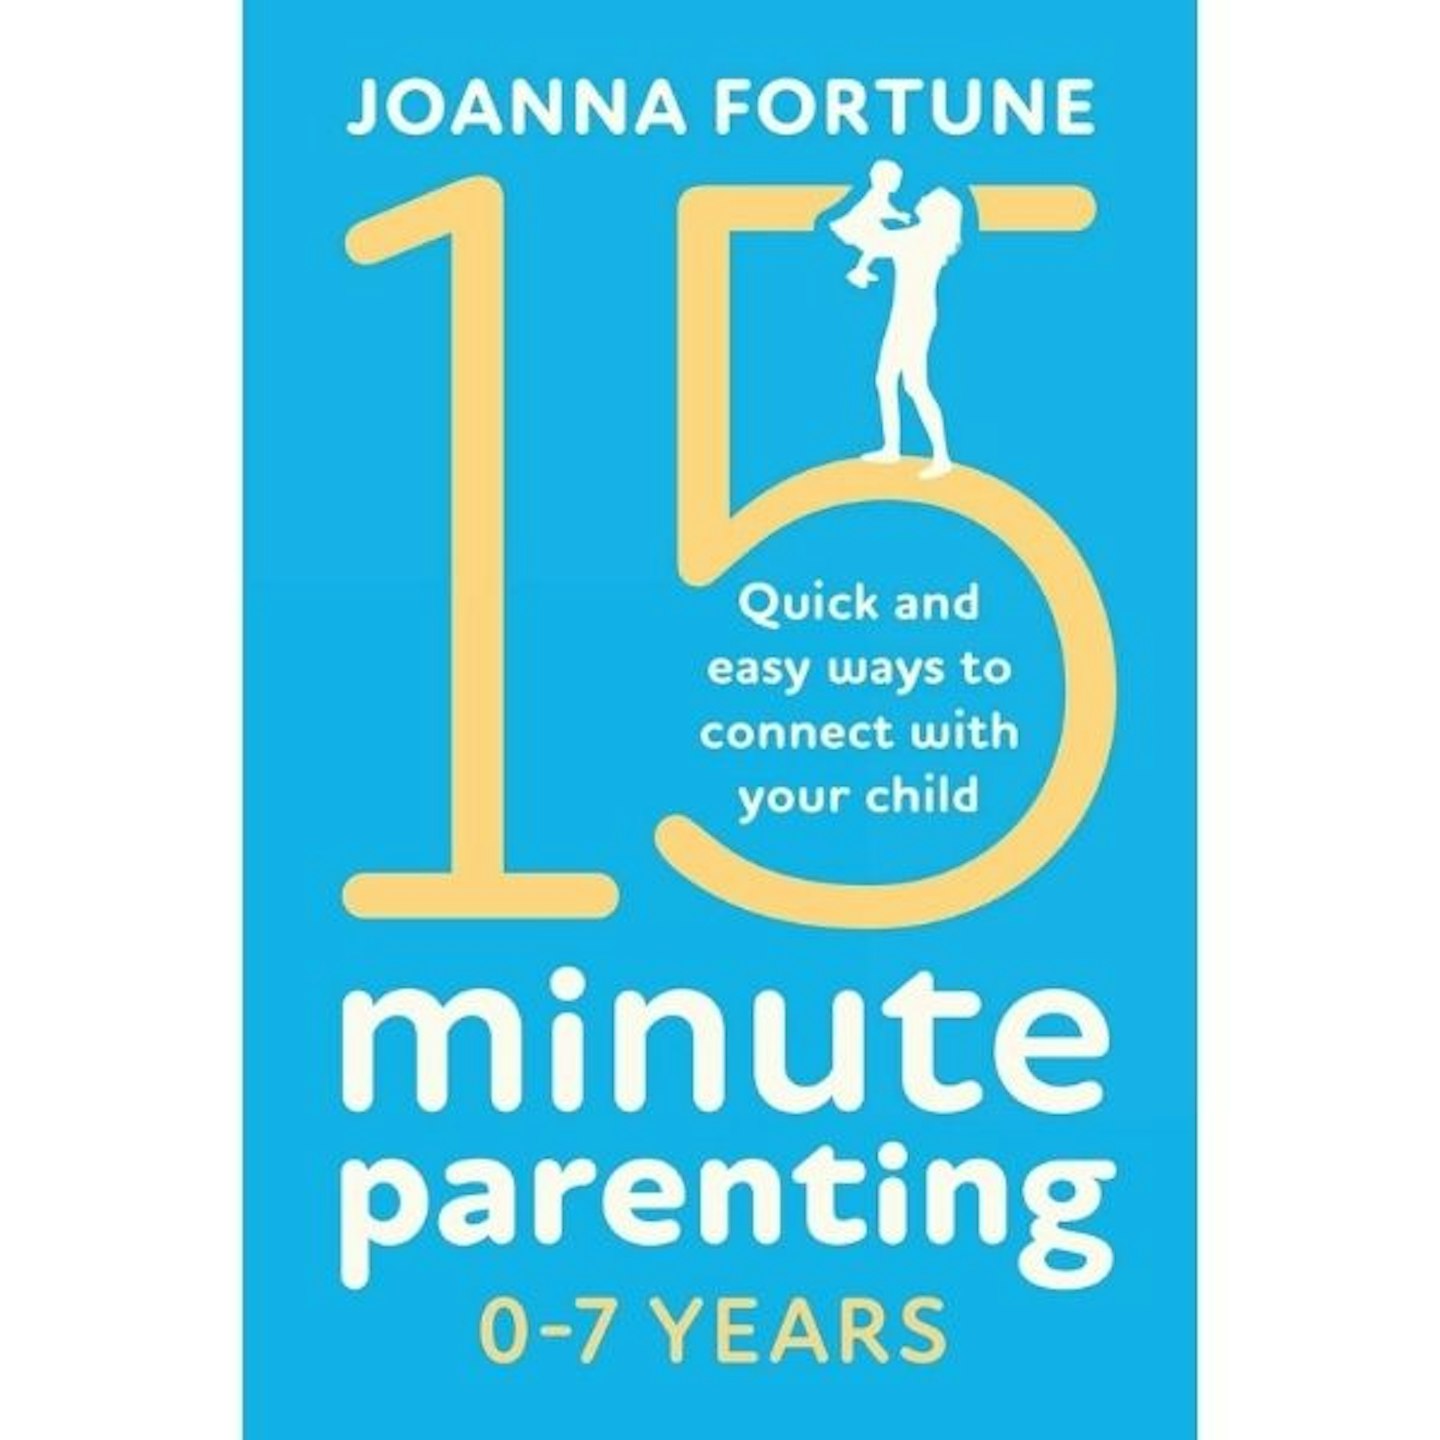 15-Minute Parenting 0-7 Years: Quick And Easy Ways To Connect With Your Child, By Joanna Fortune